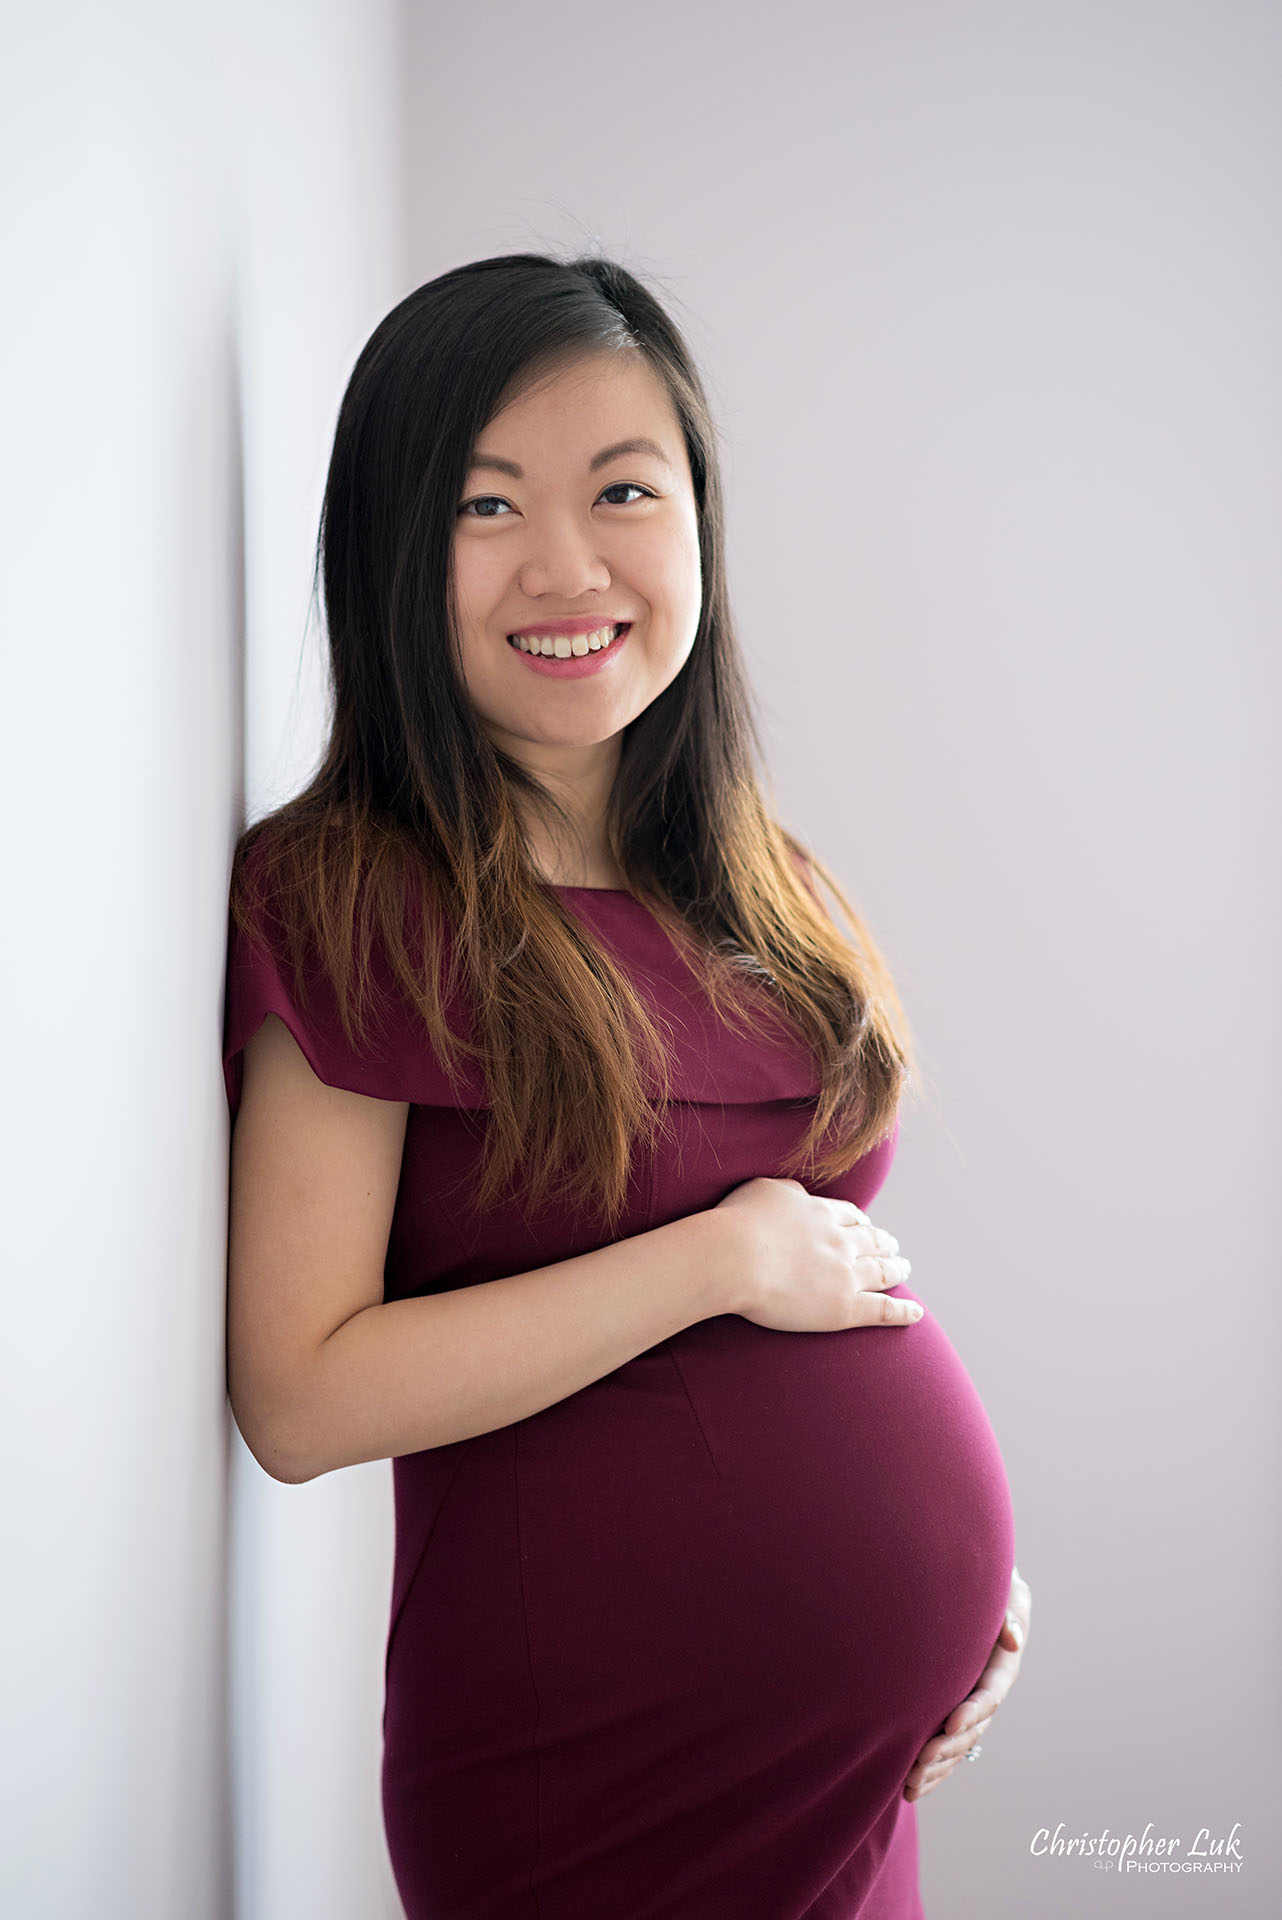 Christopher Luk Toronto Wedding Family Maternity Photographer - Markham Richmond Hill Toronto Natural Candid Photojournalistic Mom Baby Bump Baby Pregnant Pregnancy Smile Belly Purple Vertical